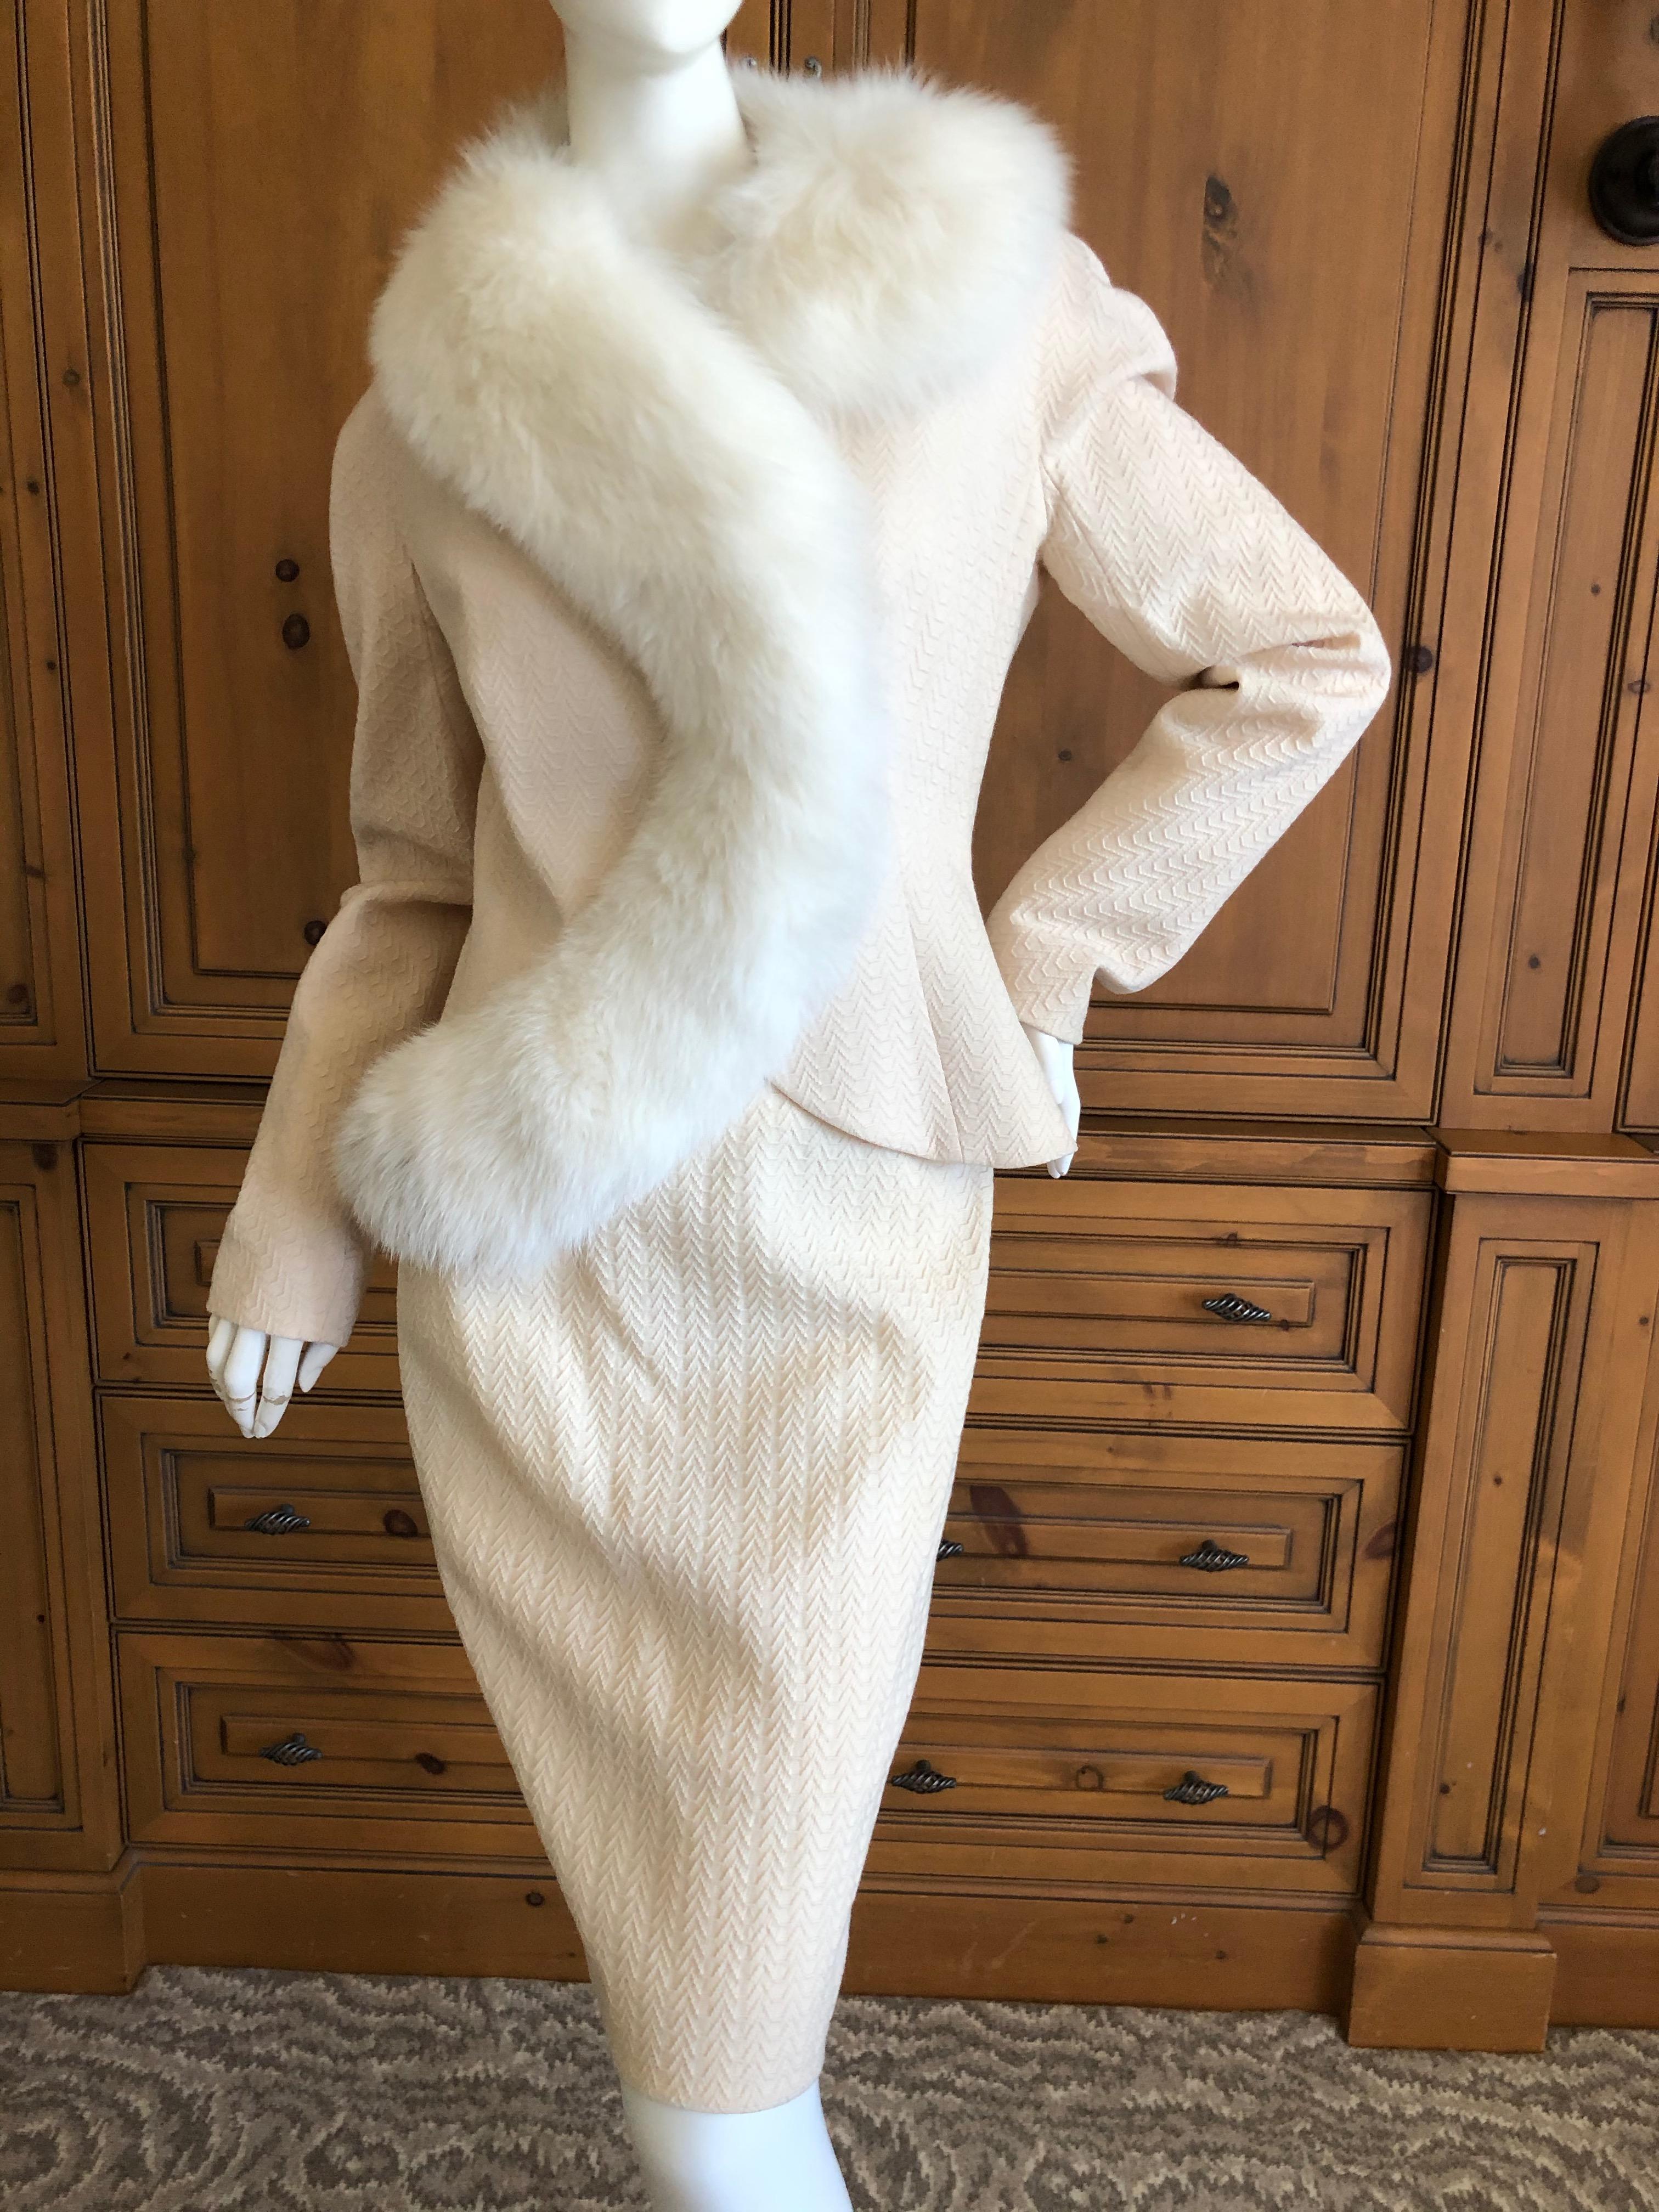  Christian Dior AW '97 by John Galliano Vintage Fox Fur Trim Jacket & Skirt Suit For Sale 3